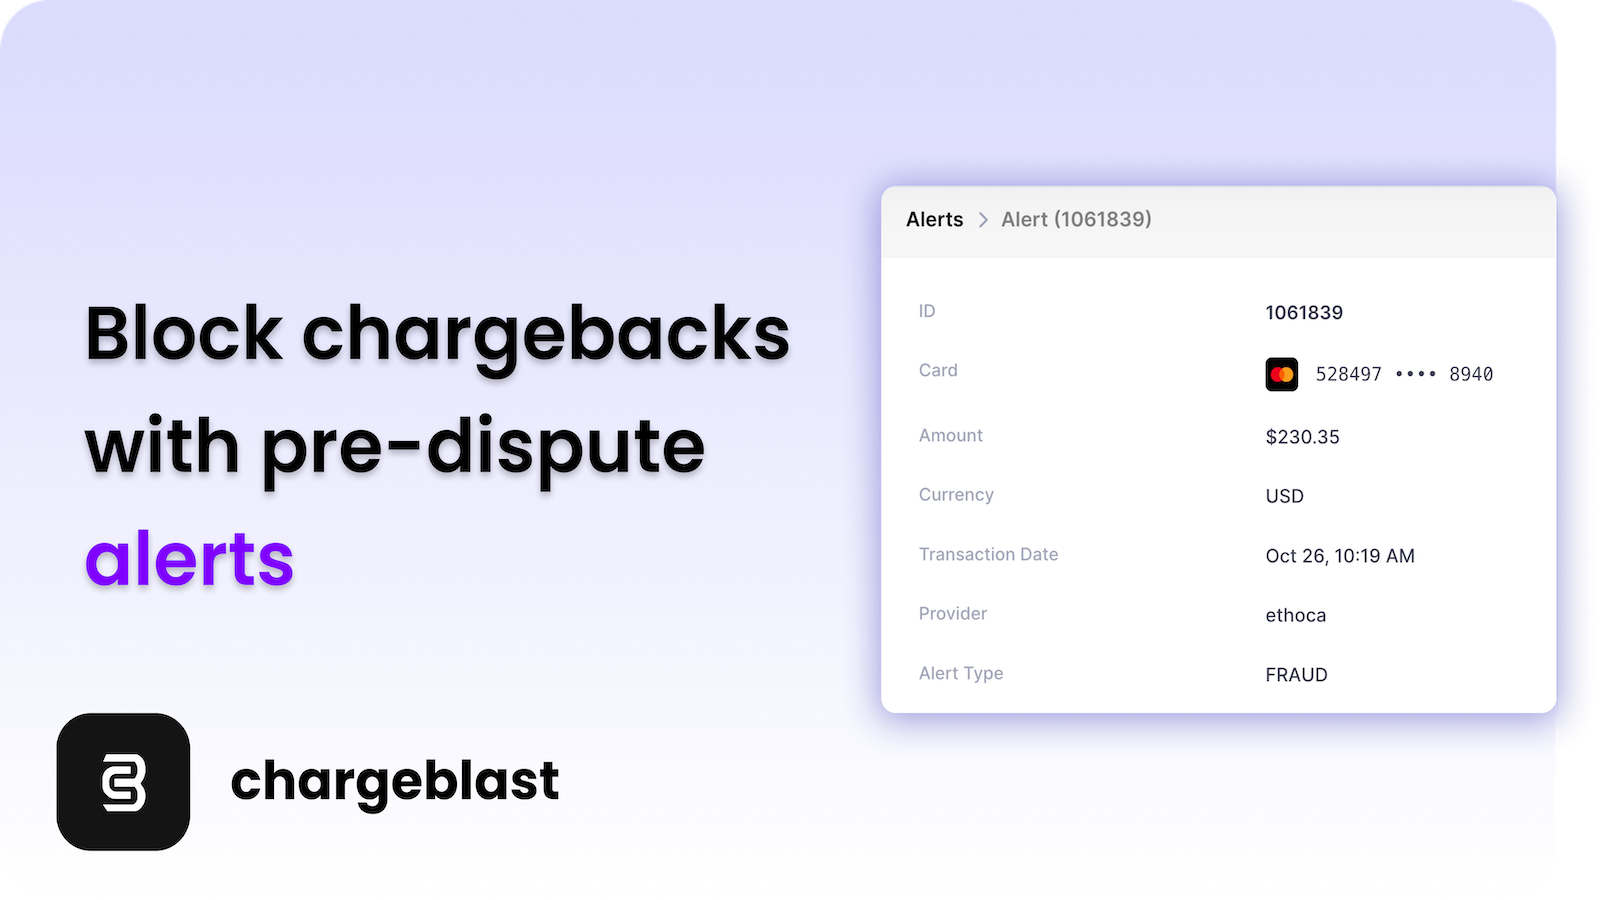 Chargeback details from every card network. 